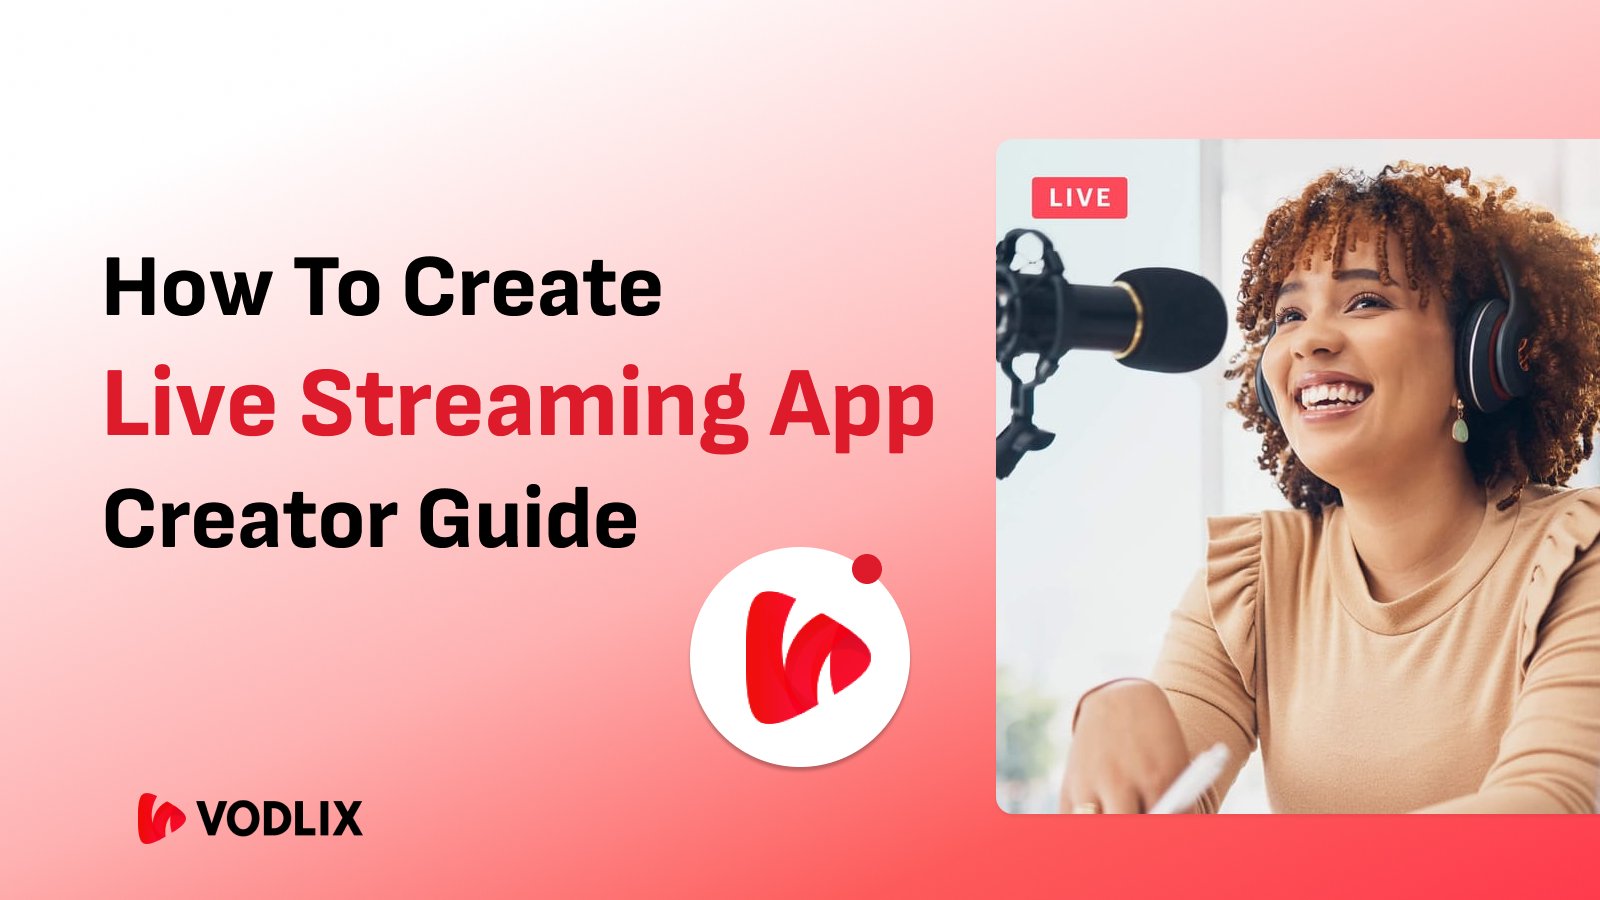 How to Create A Live Streaming App: Creator Guide